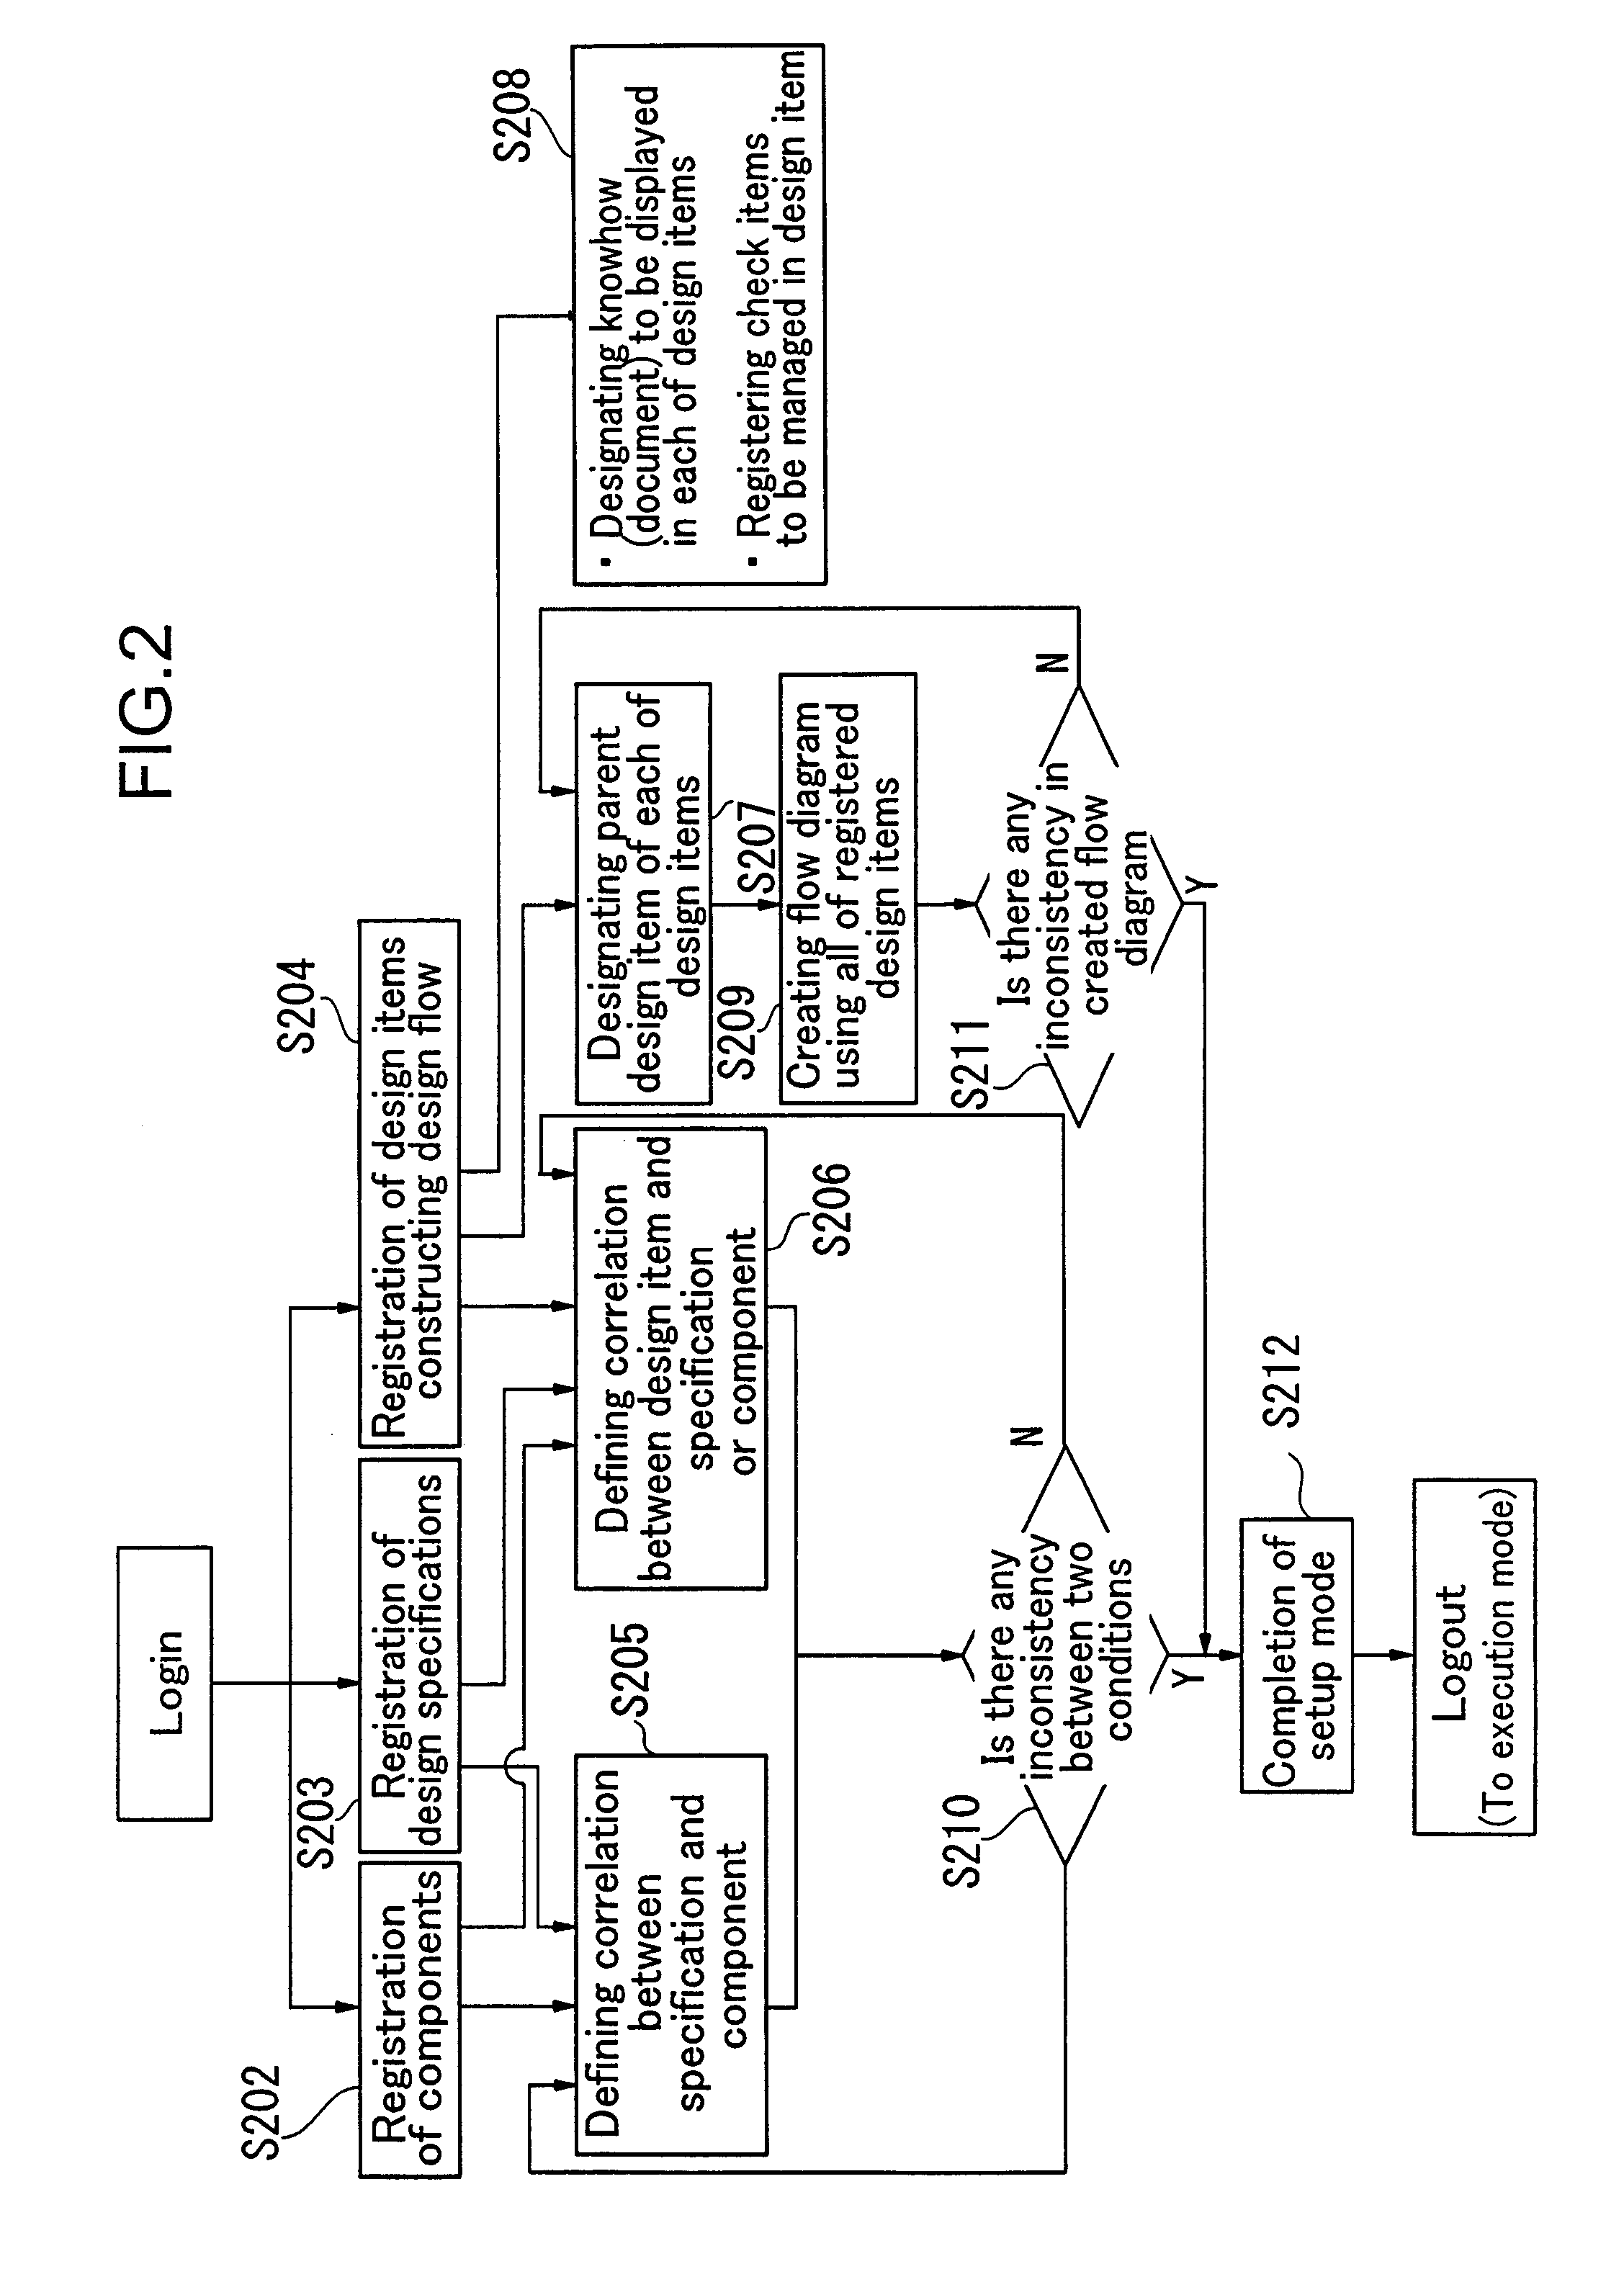 Method and system for supporting circuit design for products